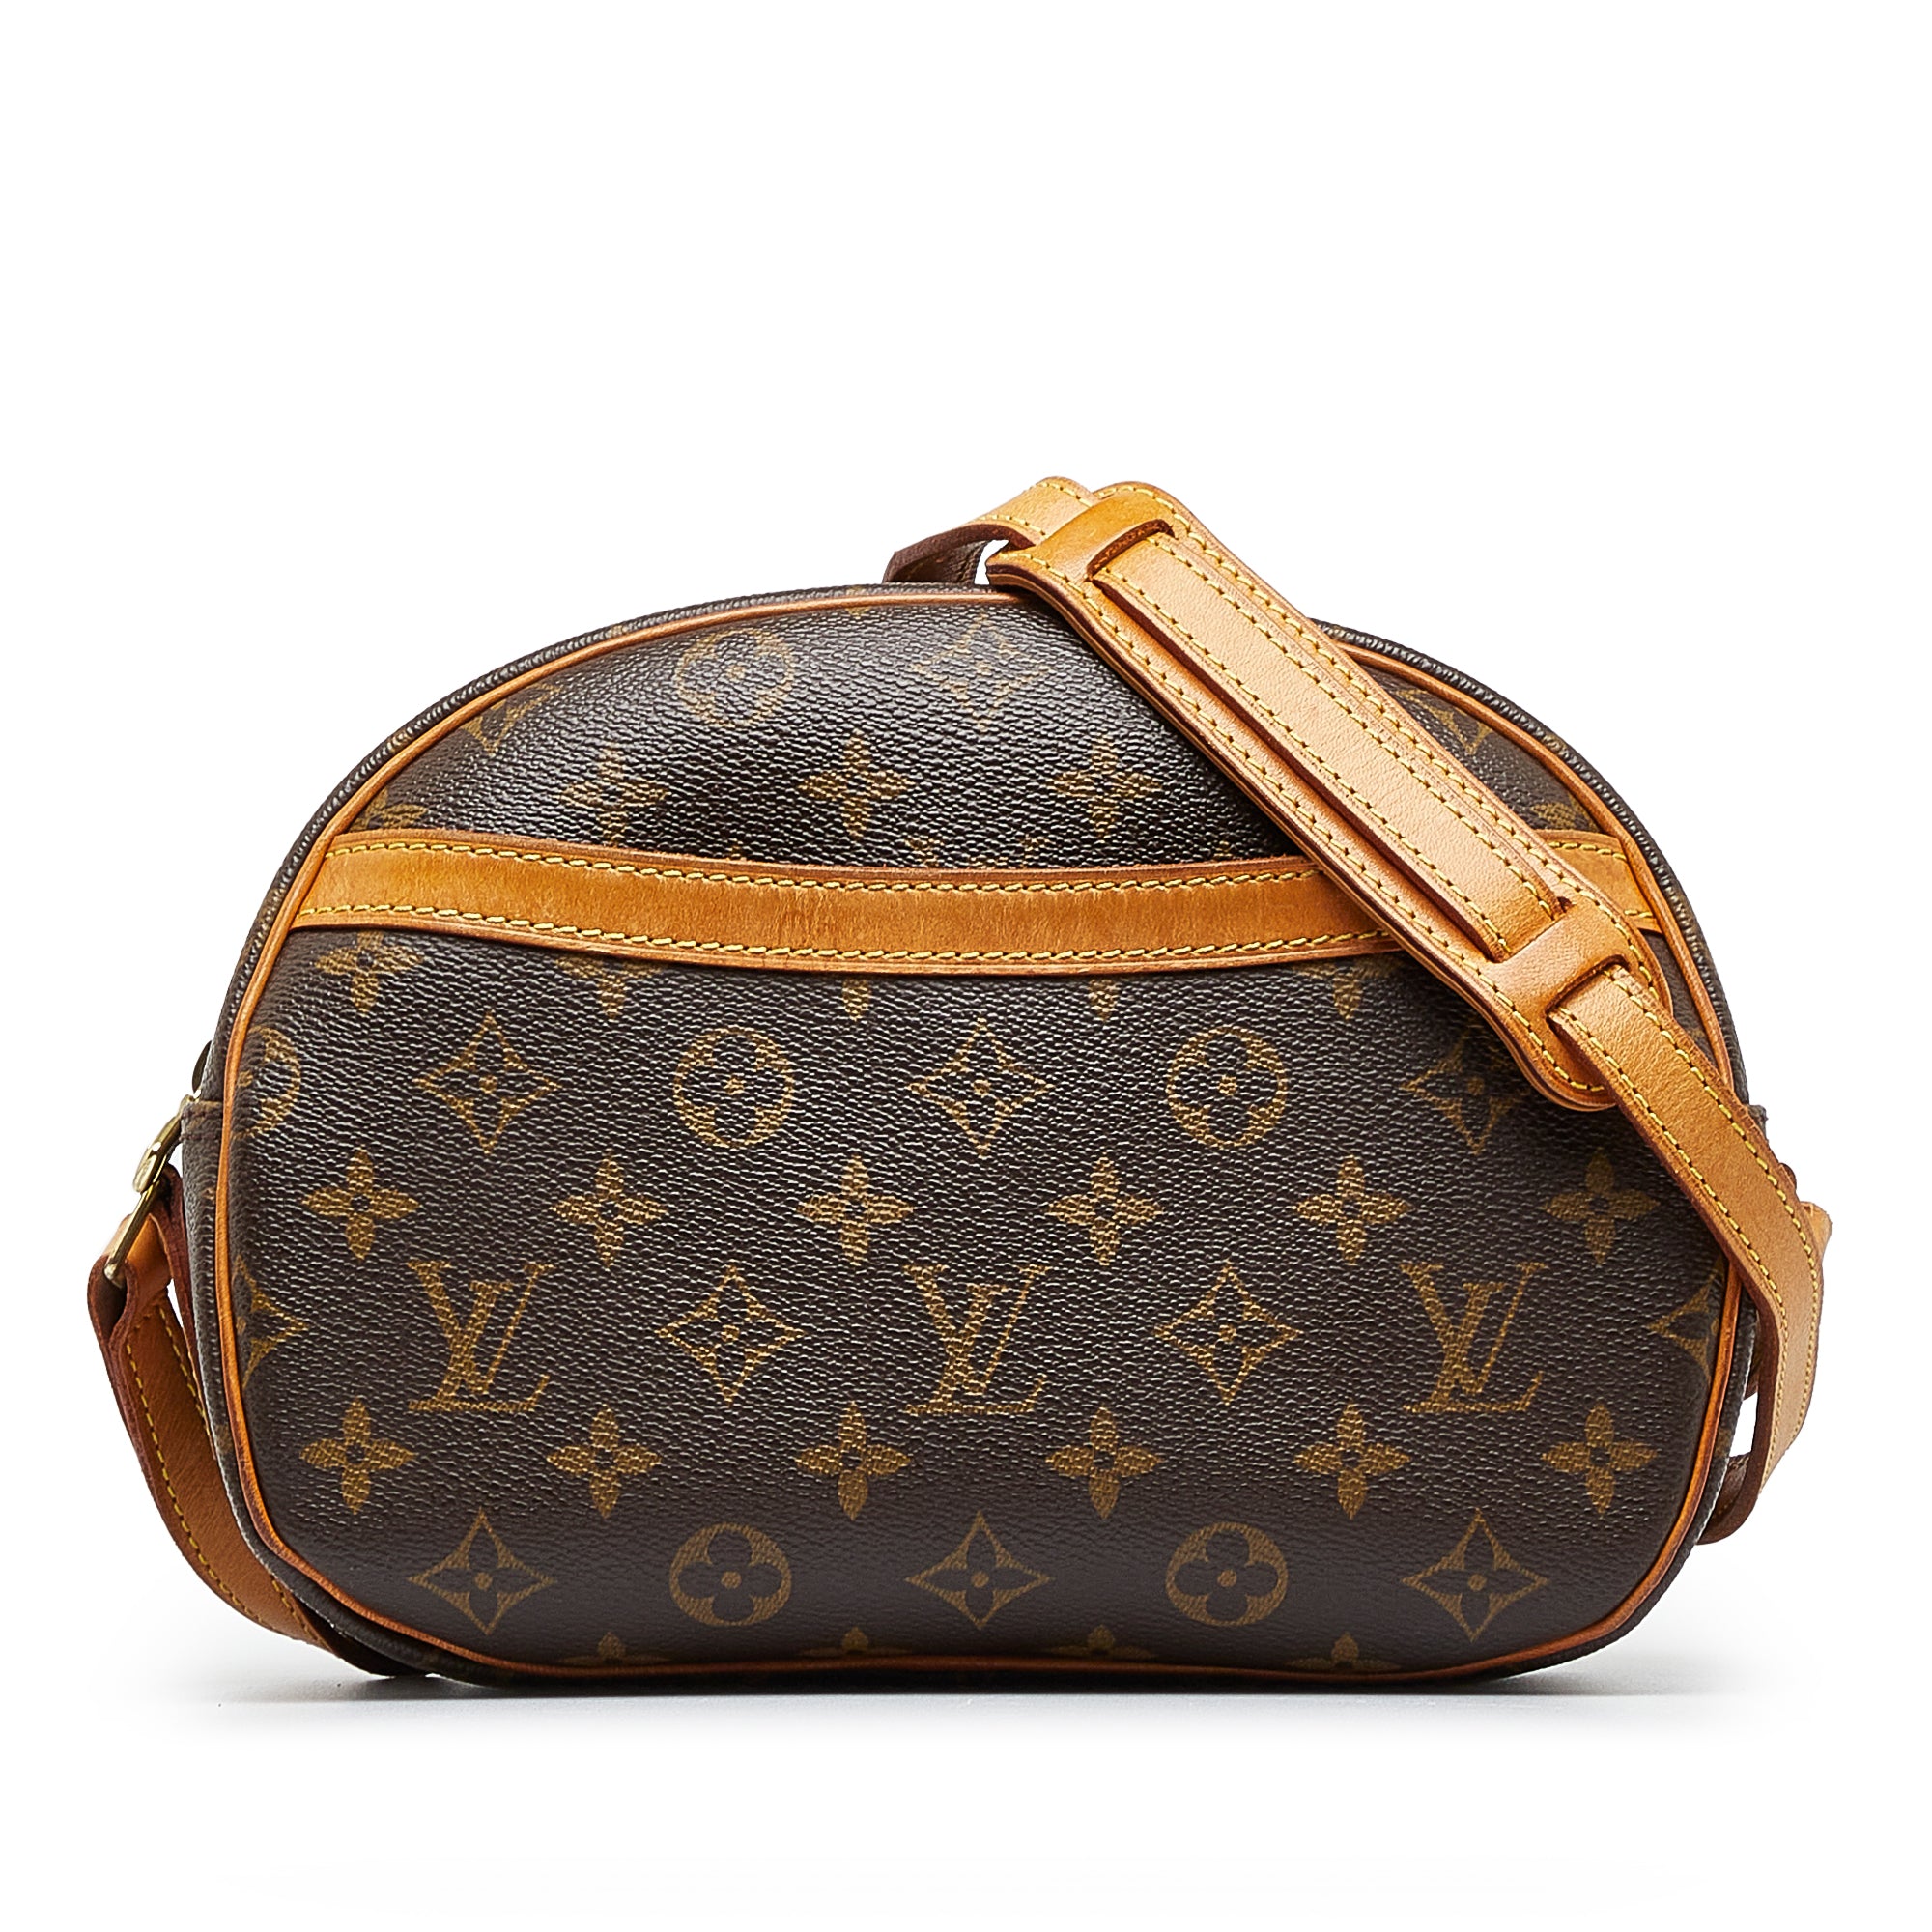 Blois leather handbag Louis Vuitton Brown in Leather - 37624968